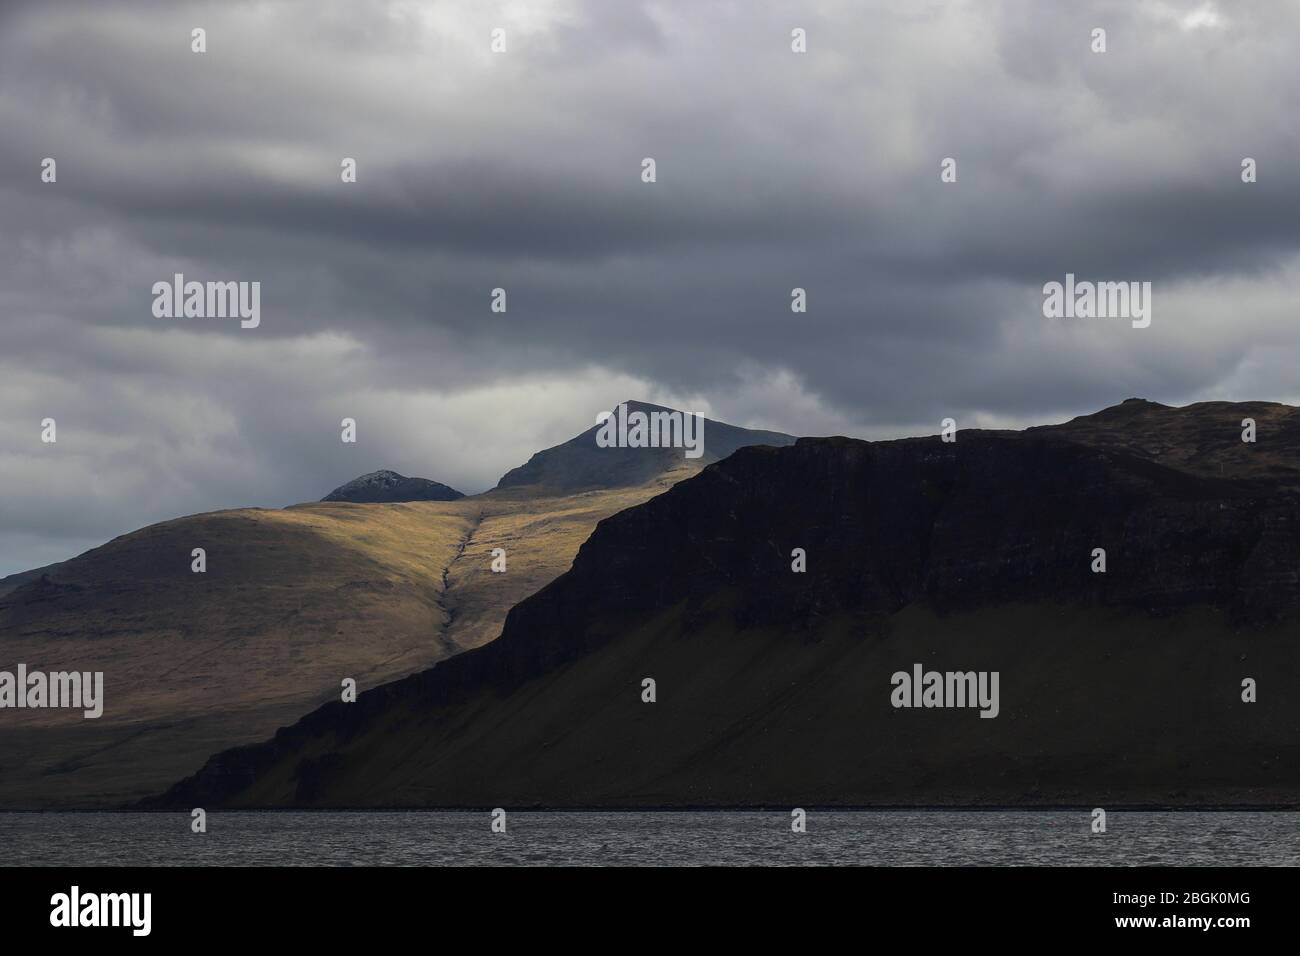 View of Ben More, Isle of Mull, Scotland from Loch Na Keal on a blustery  day, clouds overhead. Patch of sunlight behind dark Dunan Na Nighean cliffs. Stock Photo